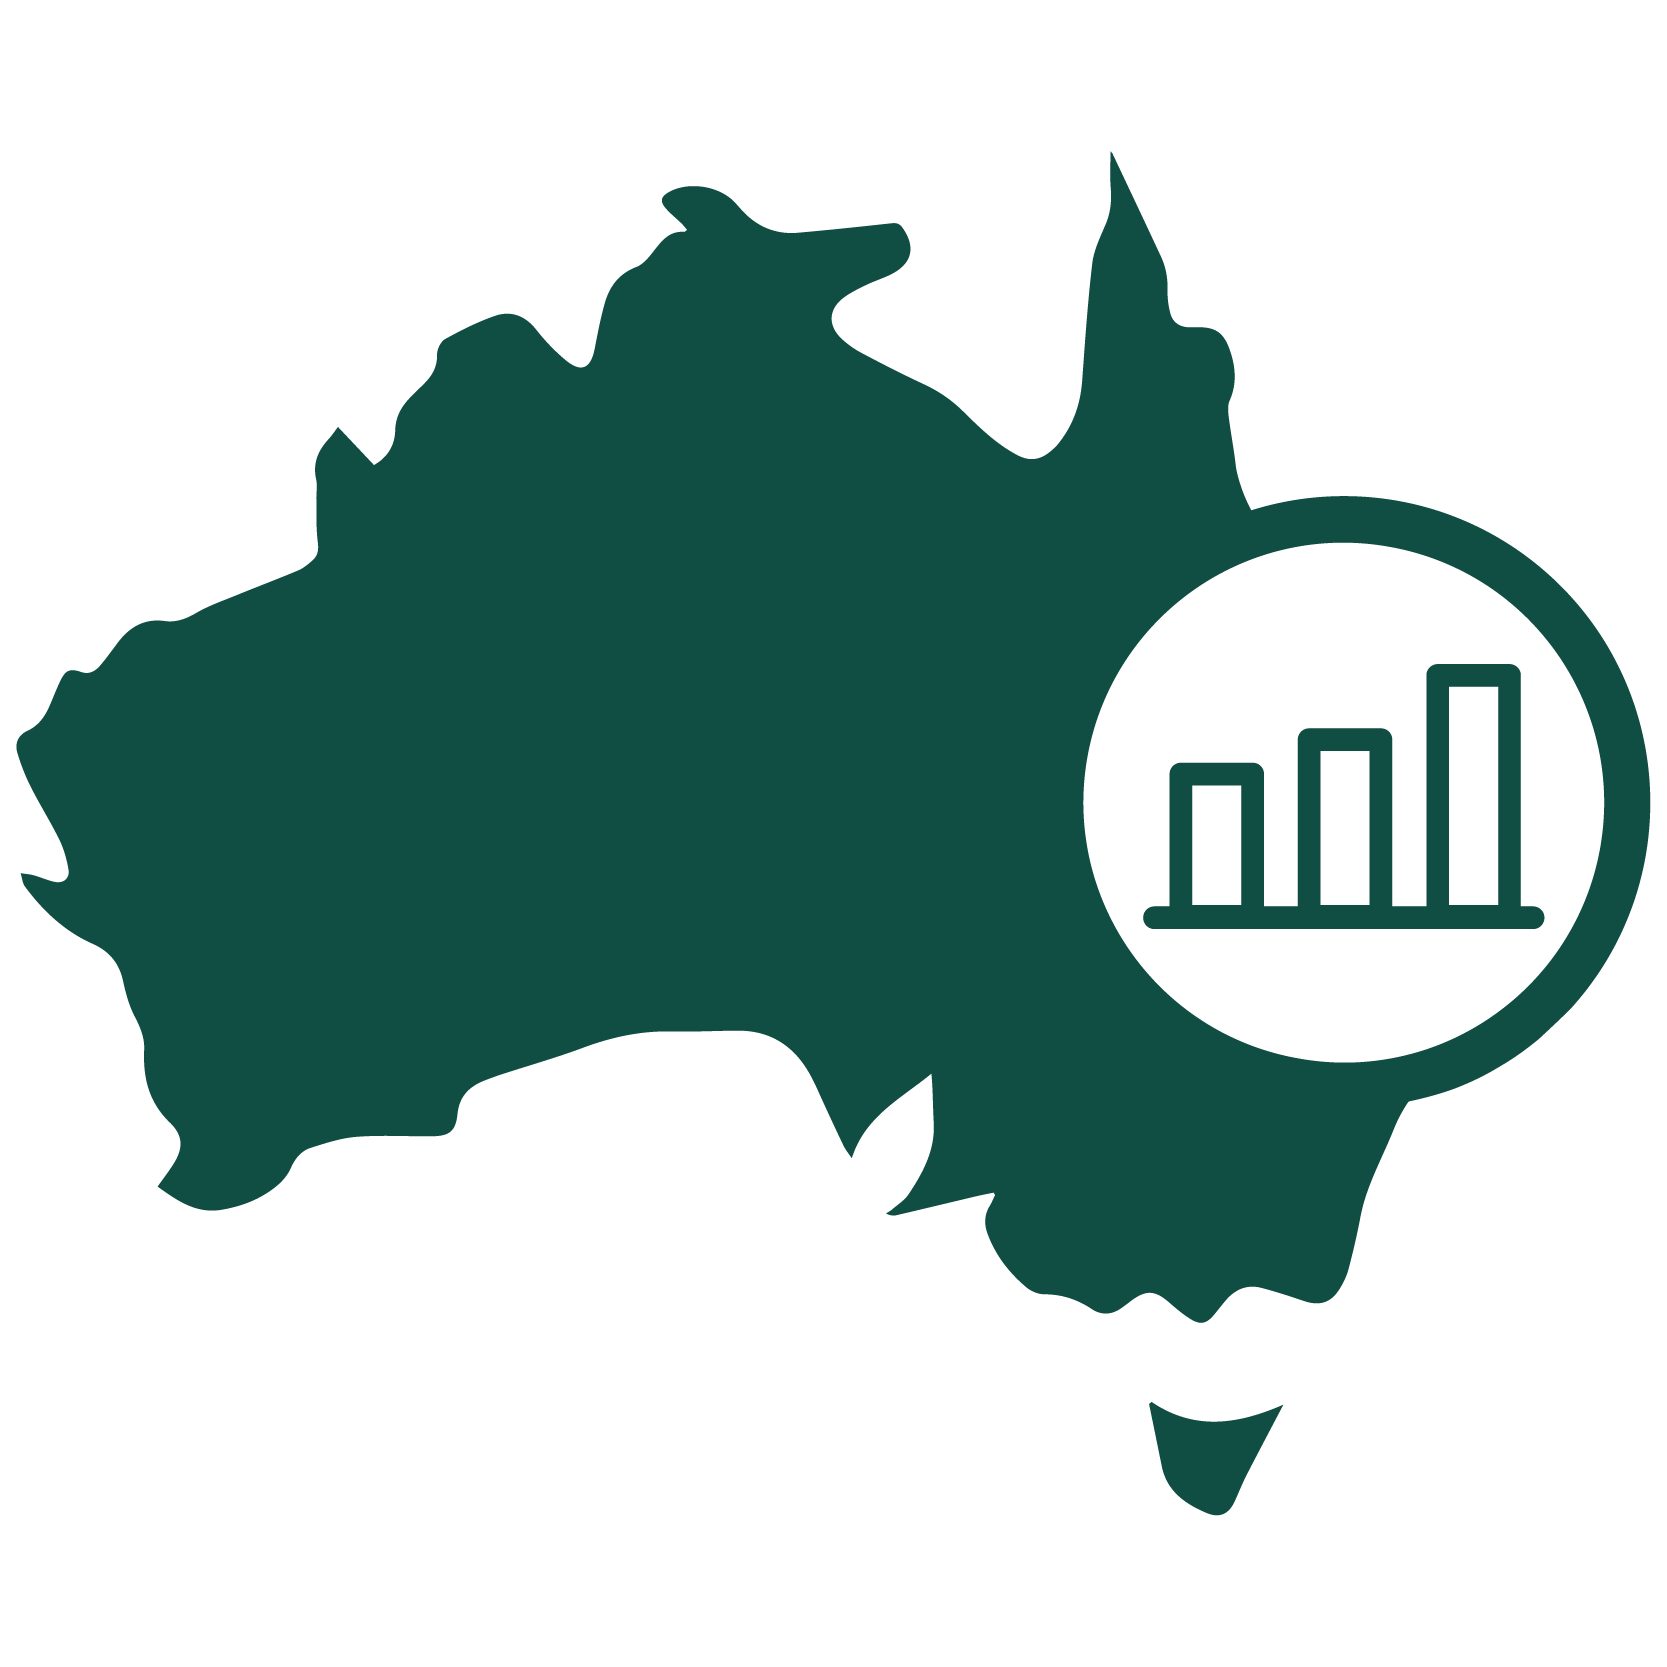 Icon of Australia with a graph next to it.